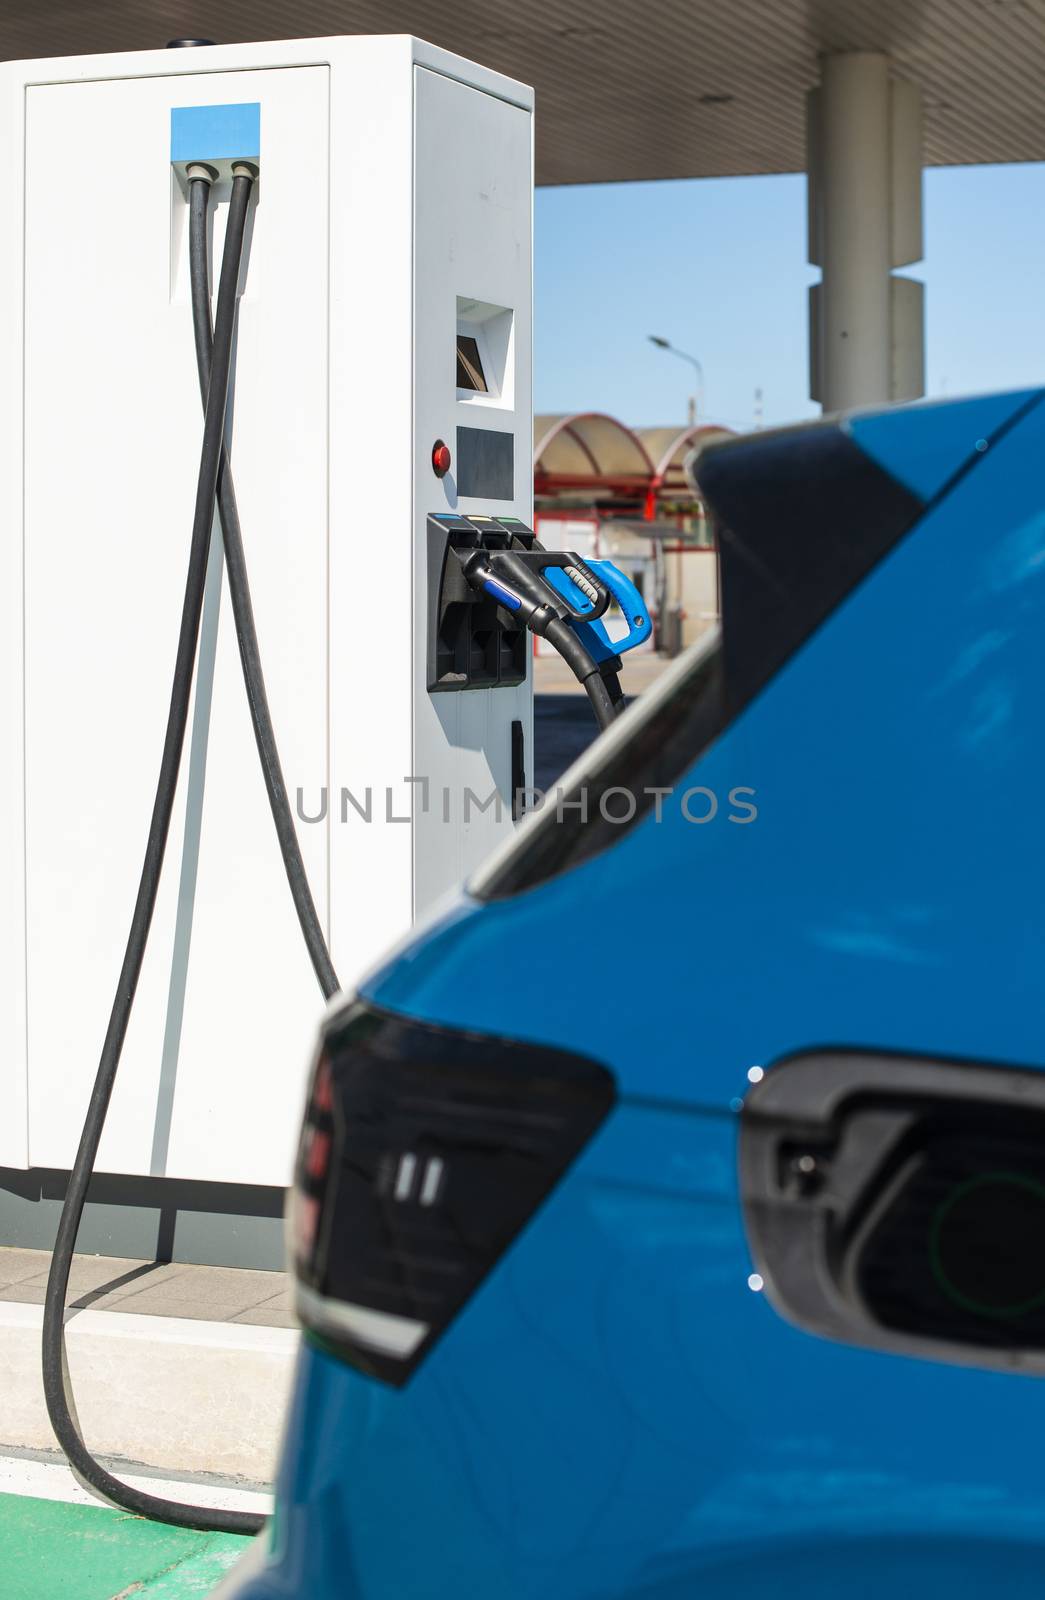 Electric car on gas station. Blue car and electric plug for charging. Ecology green fuels concept.